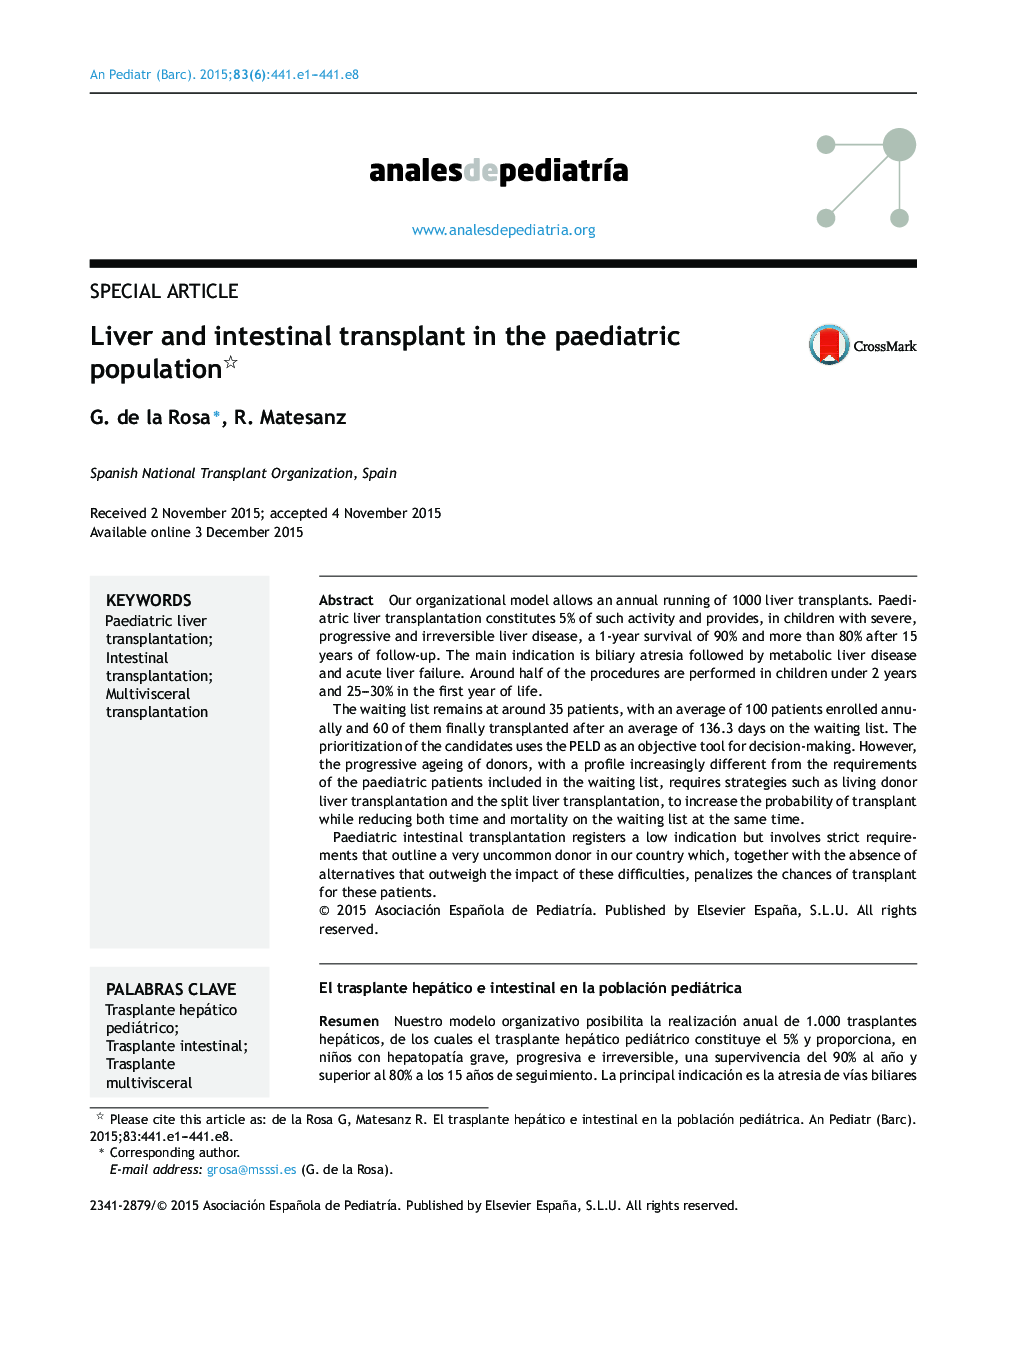 Liver and intestinal transplant in the paediatric population